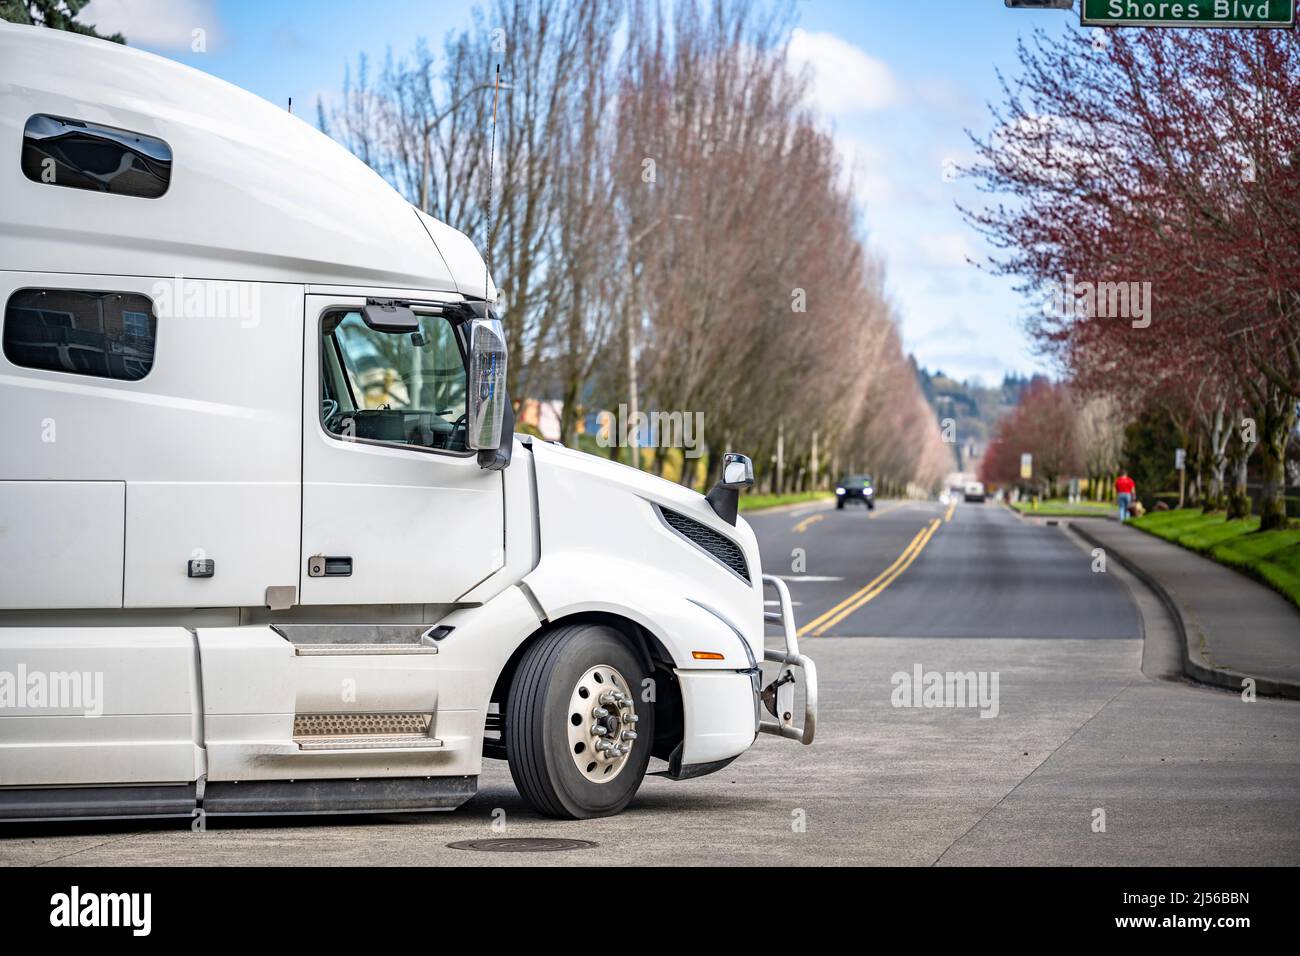 Classic white big rig industrial standard semi truck with dry van semi trailer transporting commercial cargo running on straight local city street roa Stock Photo